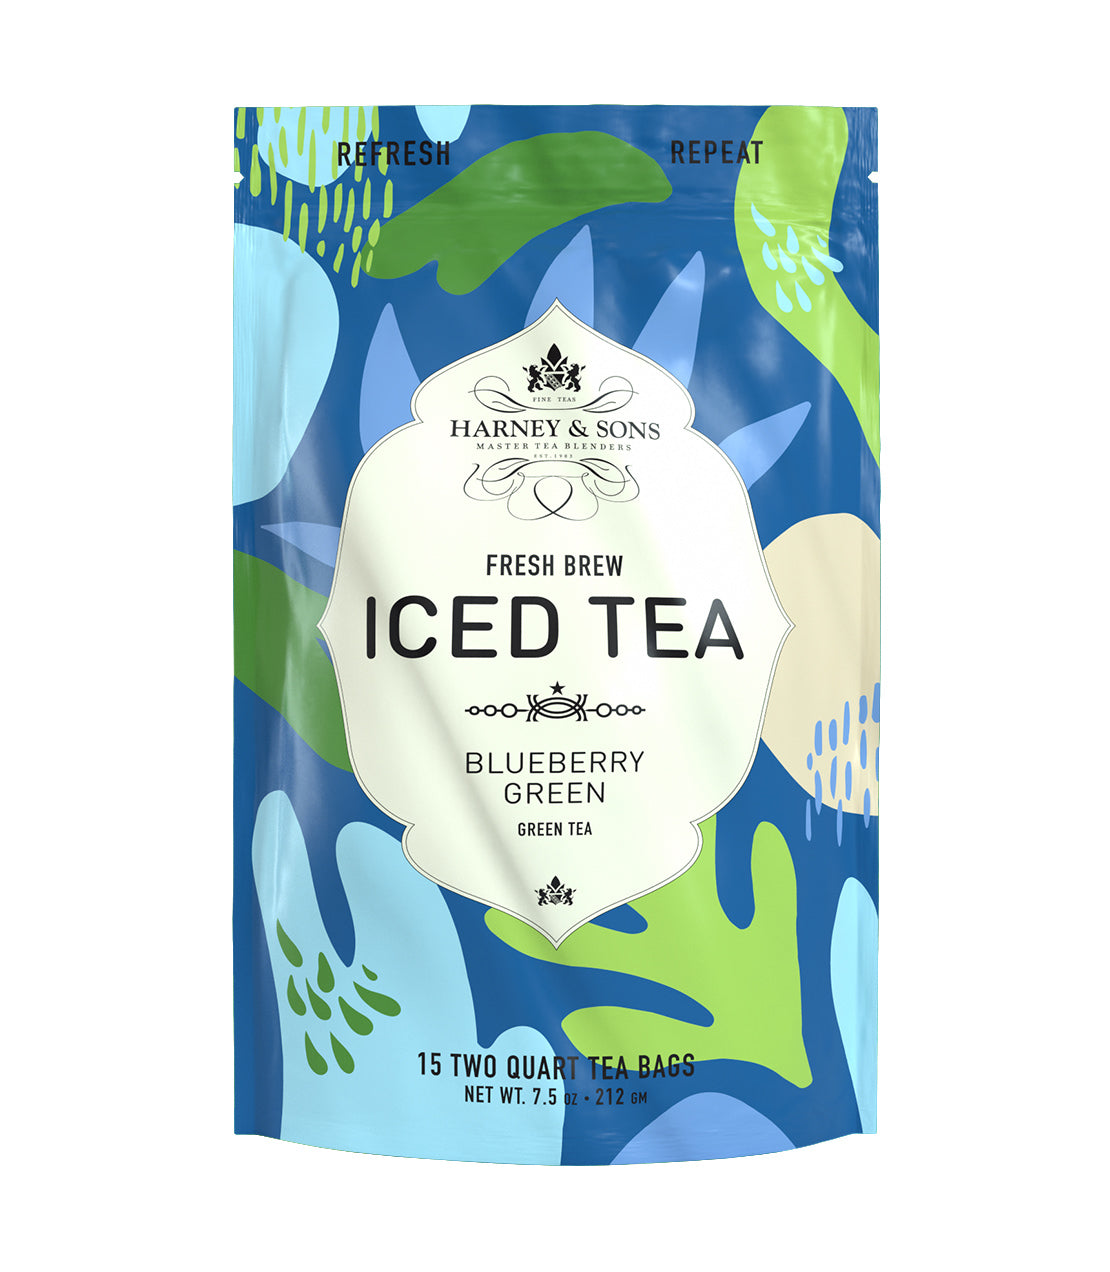 Blueberry Green Fresh Brew Iced Tea - Iced Tea Pouches Bag of 15 Pouches - Harney & Sons Fine Teas